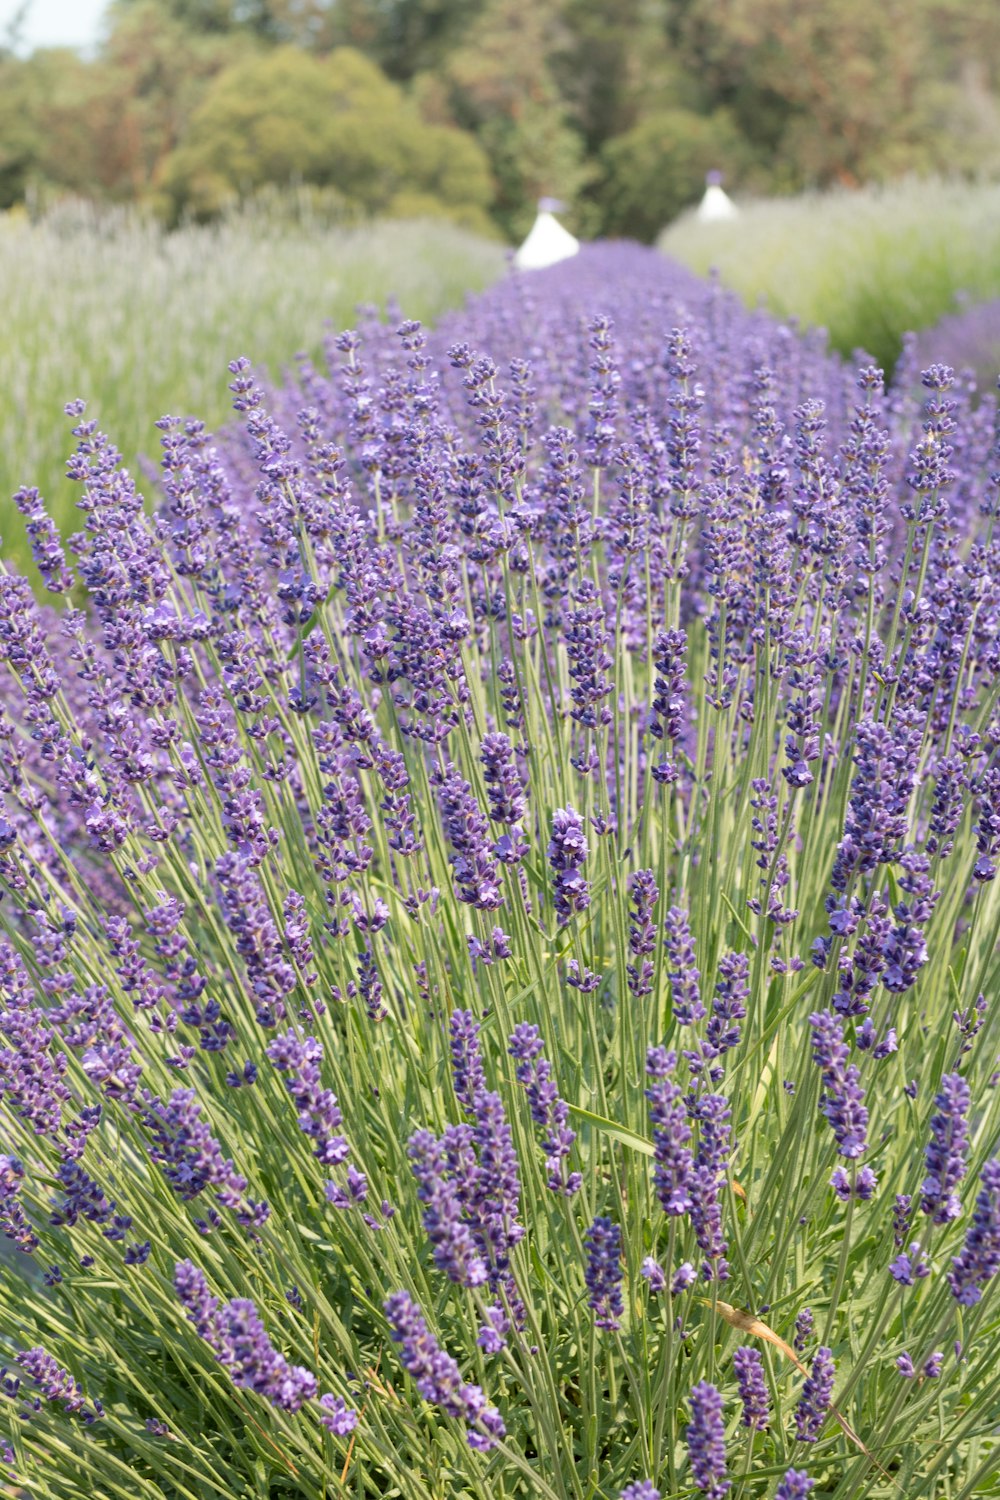 a field full of lavender flowers with trees in the background